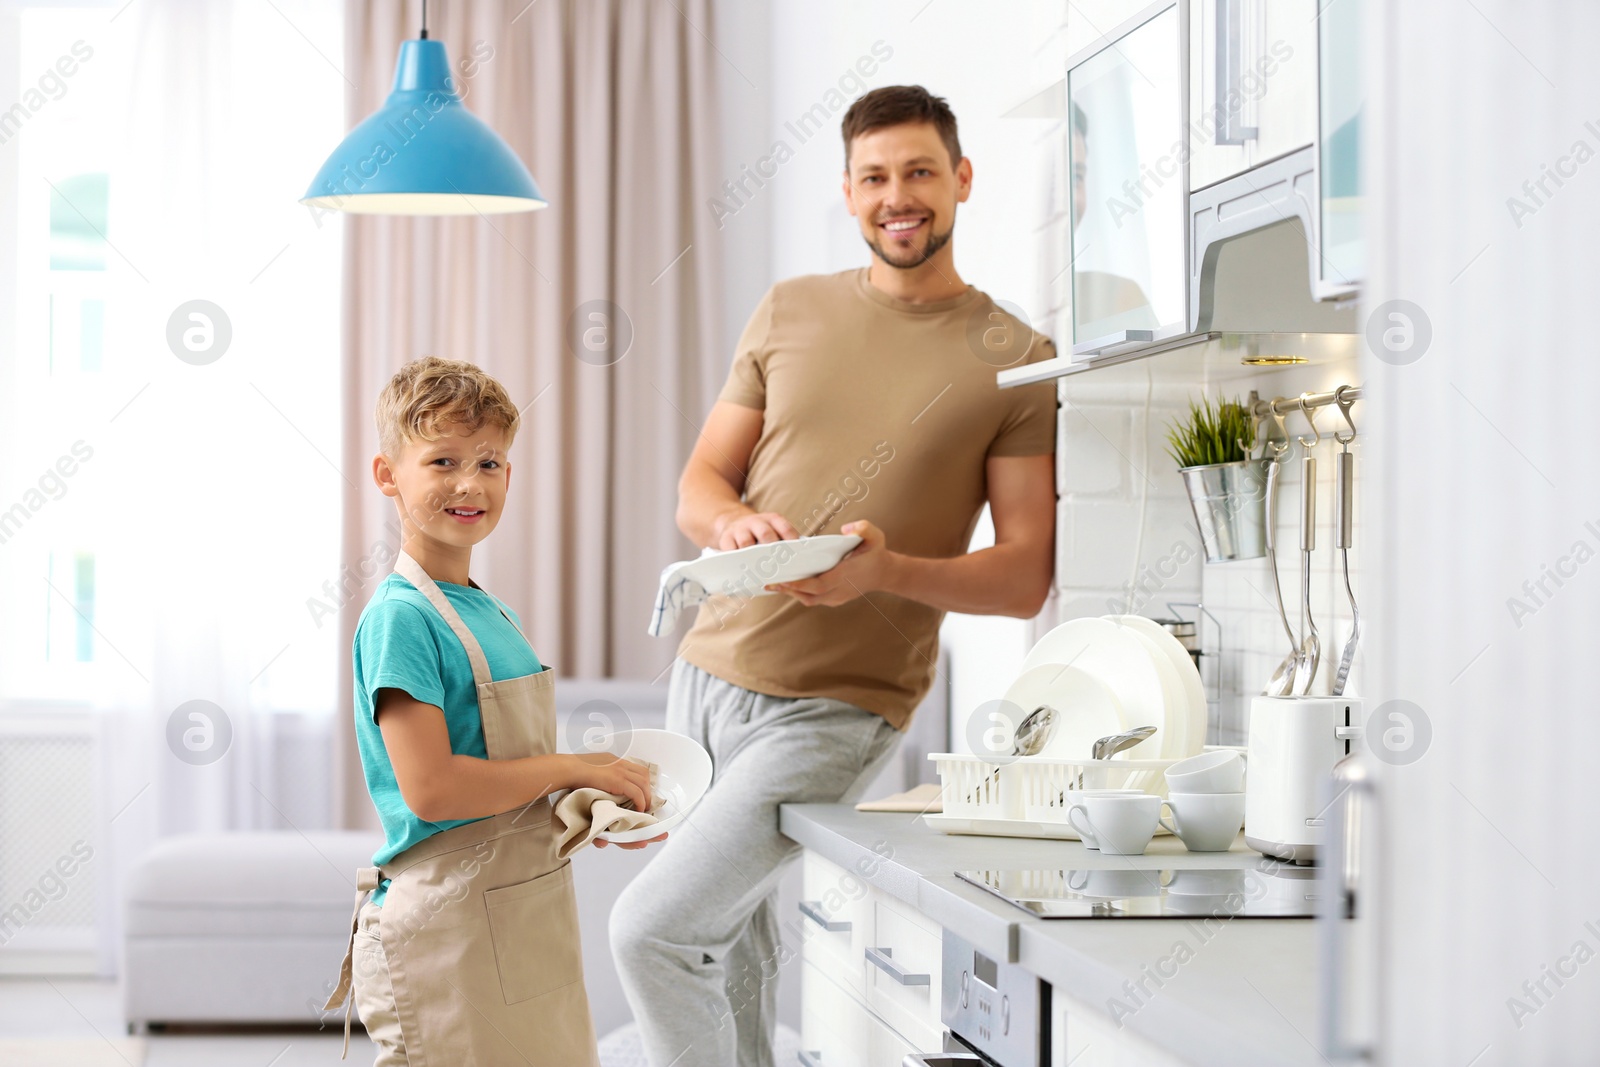 Photo of Dad and son wiping dishes in kitchen